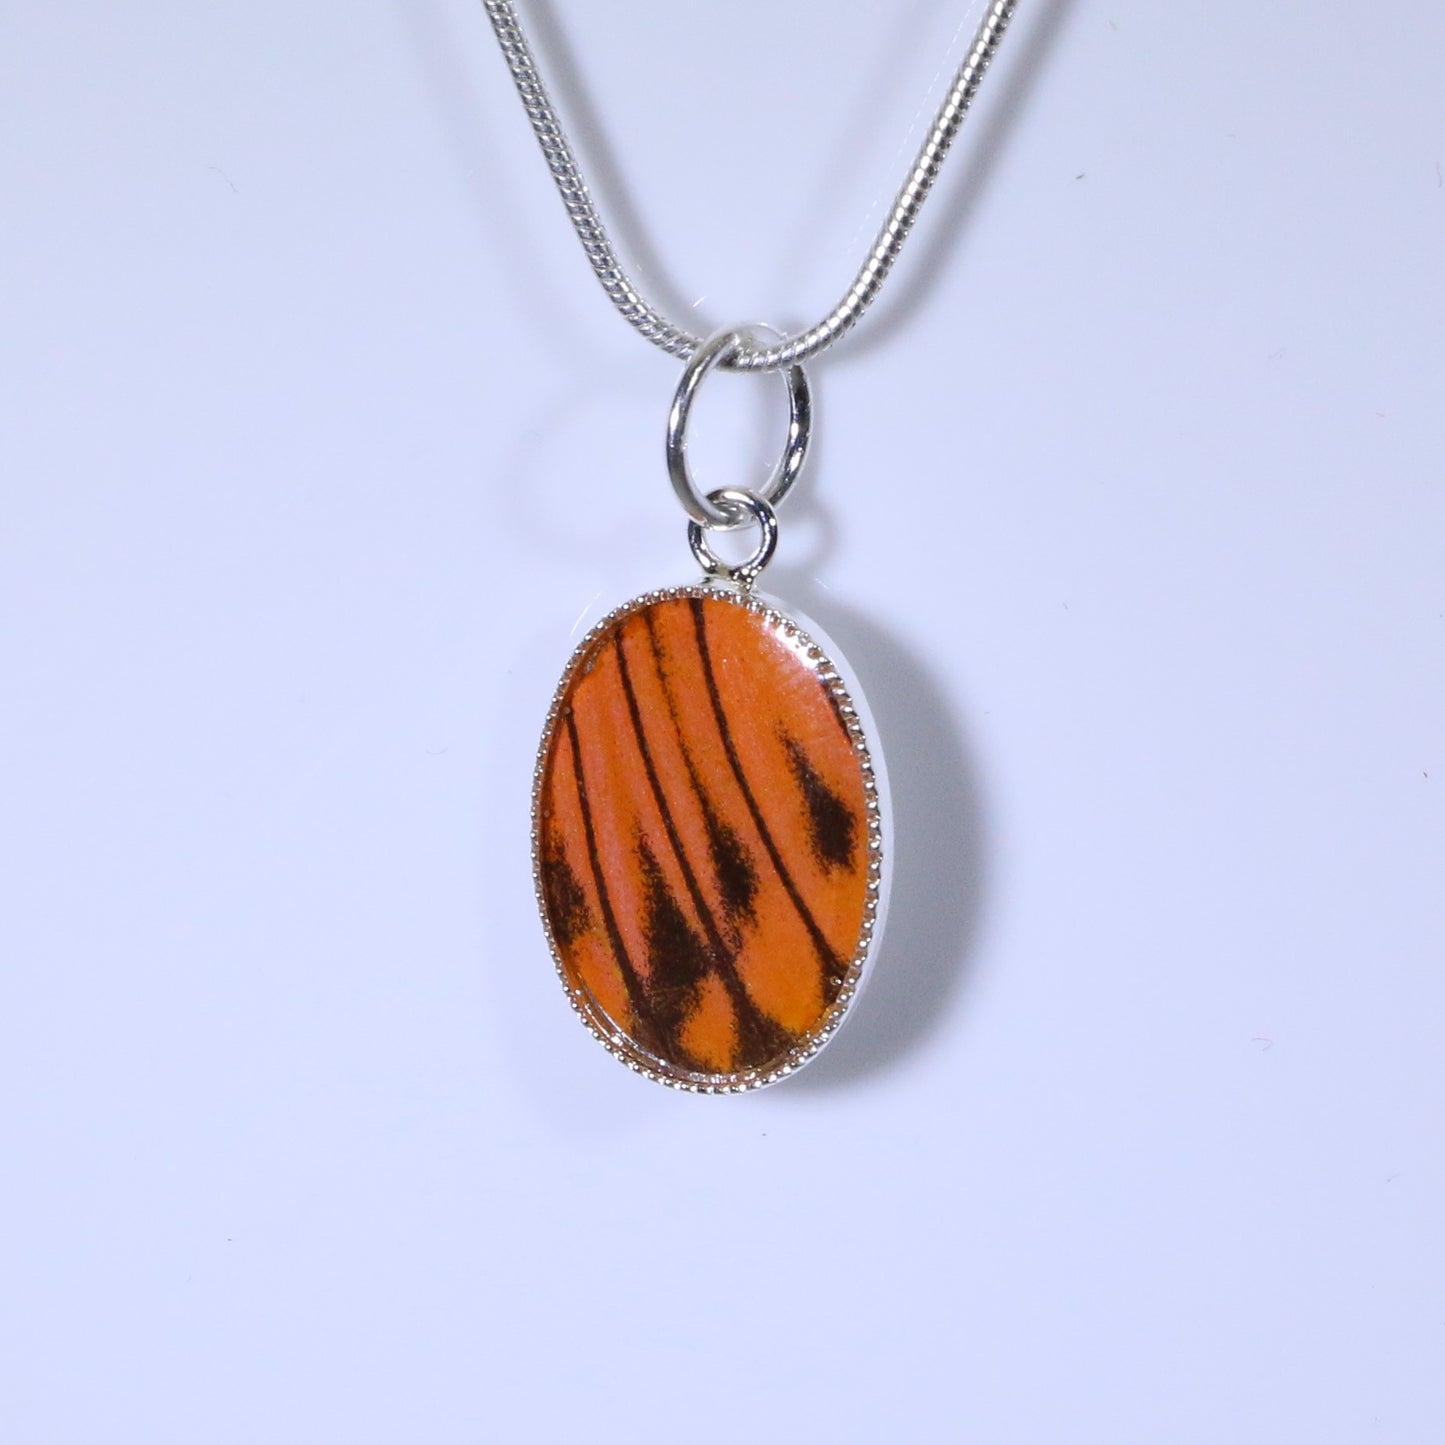 52105 - Real Butterfly Wing Jewelry - Pendant - Small - Hebomia - Orange